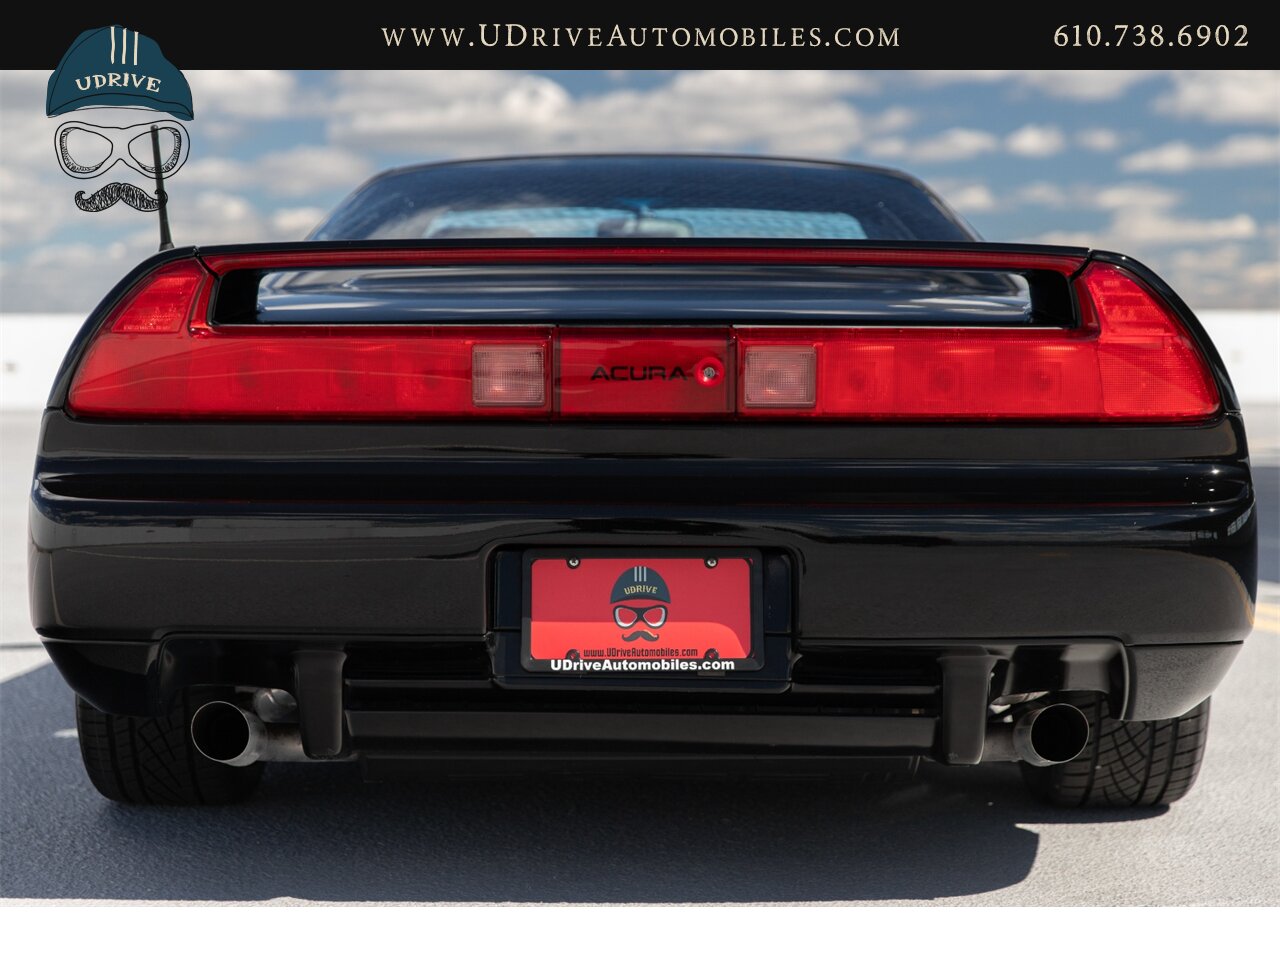 1996 Acura NSX NSX-T  5 Speed Manual Fresh Timing Belt Service - Photo 24 - West Chester, PA 19382